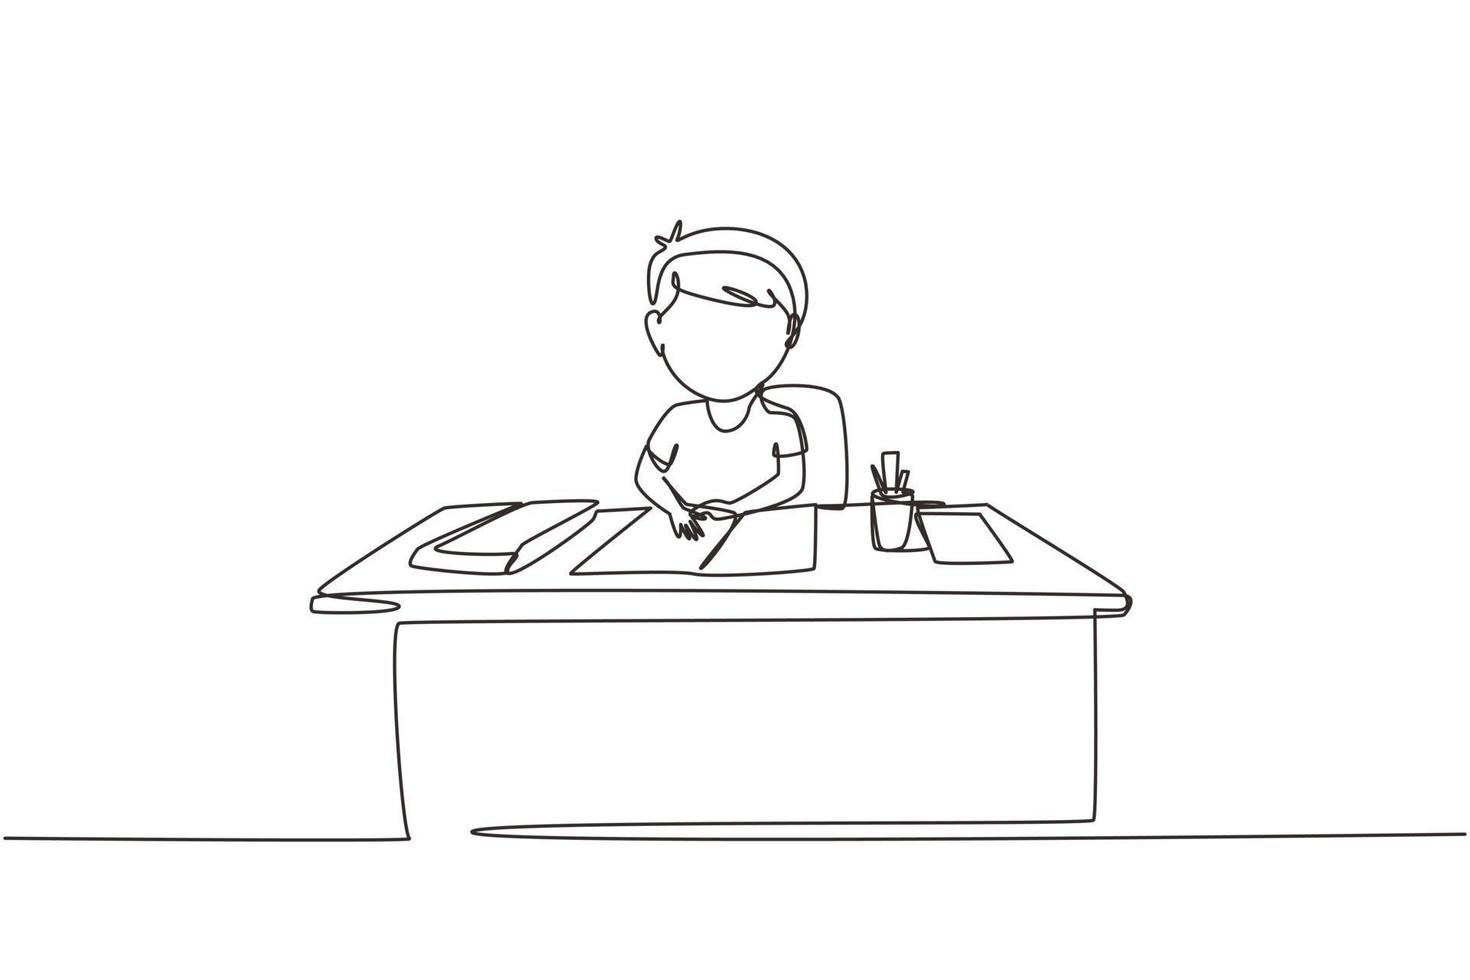 Single continuous line drawing boy studying on table with stationery such as books, pencils, pens. Kid makes homework from school. Intelligent student. One line draw graphic design vector illustration